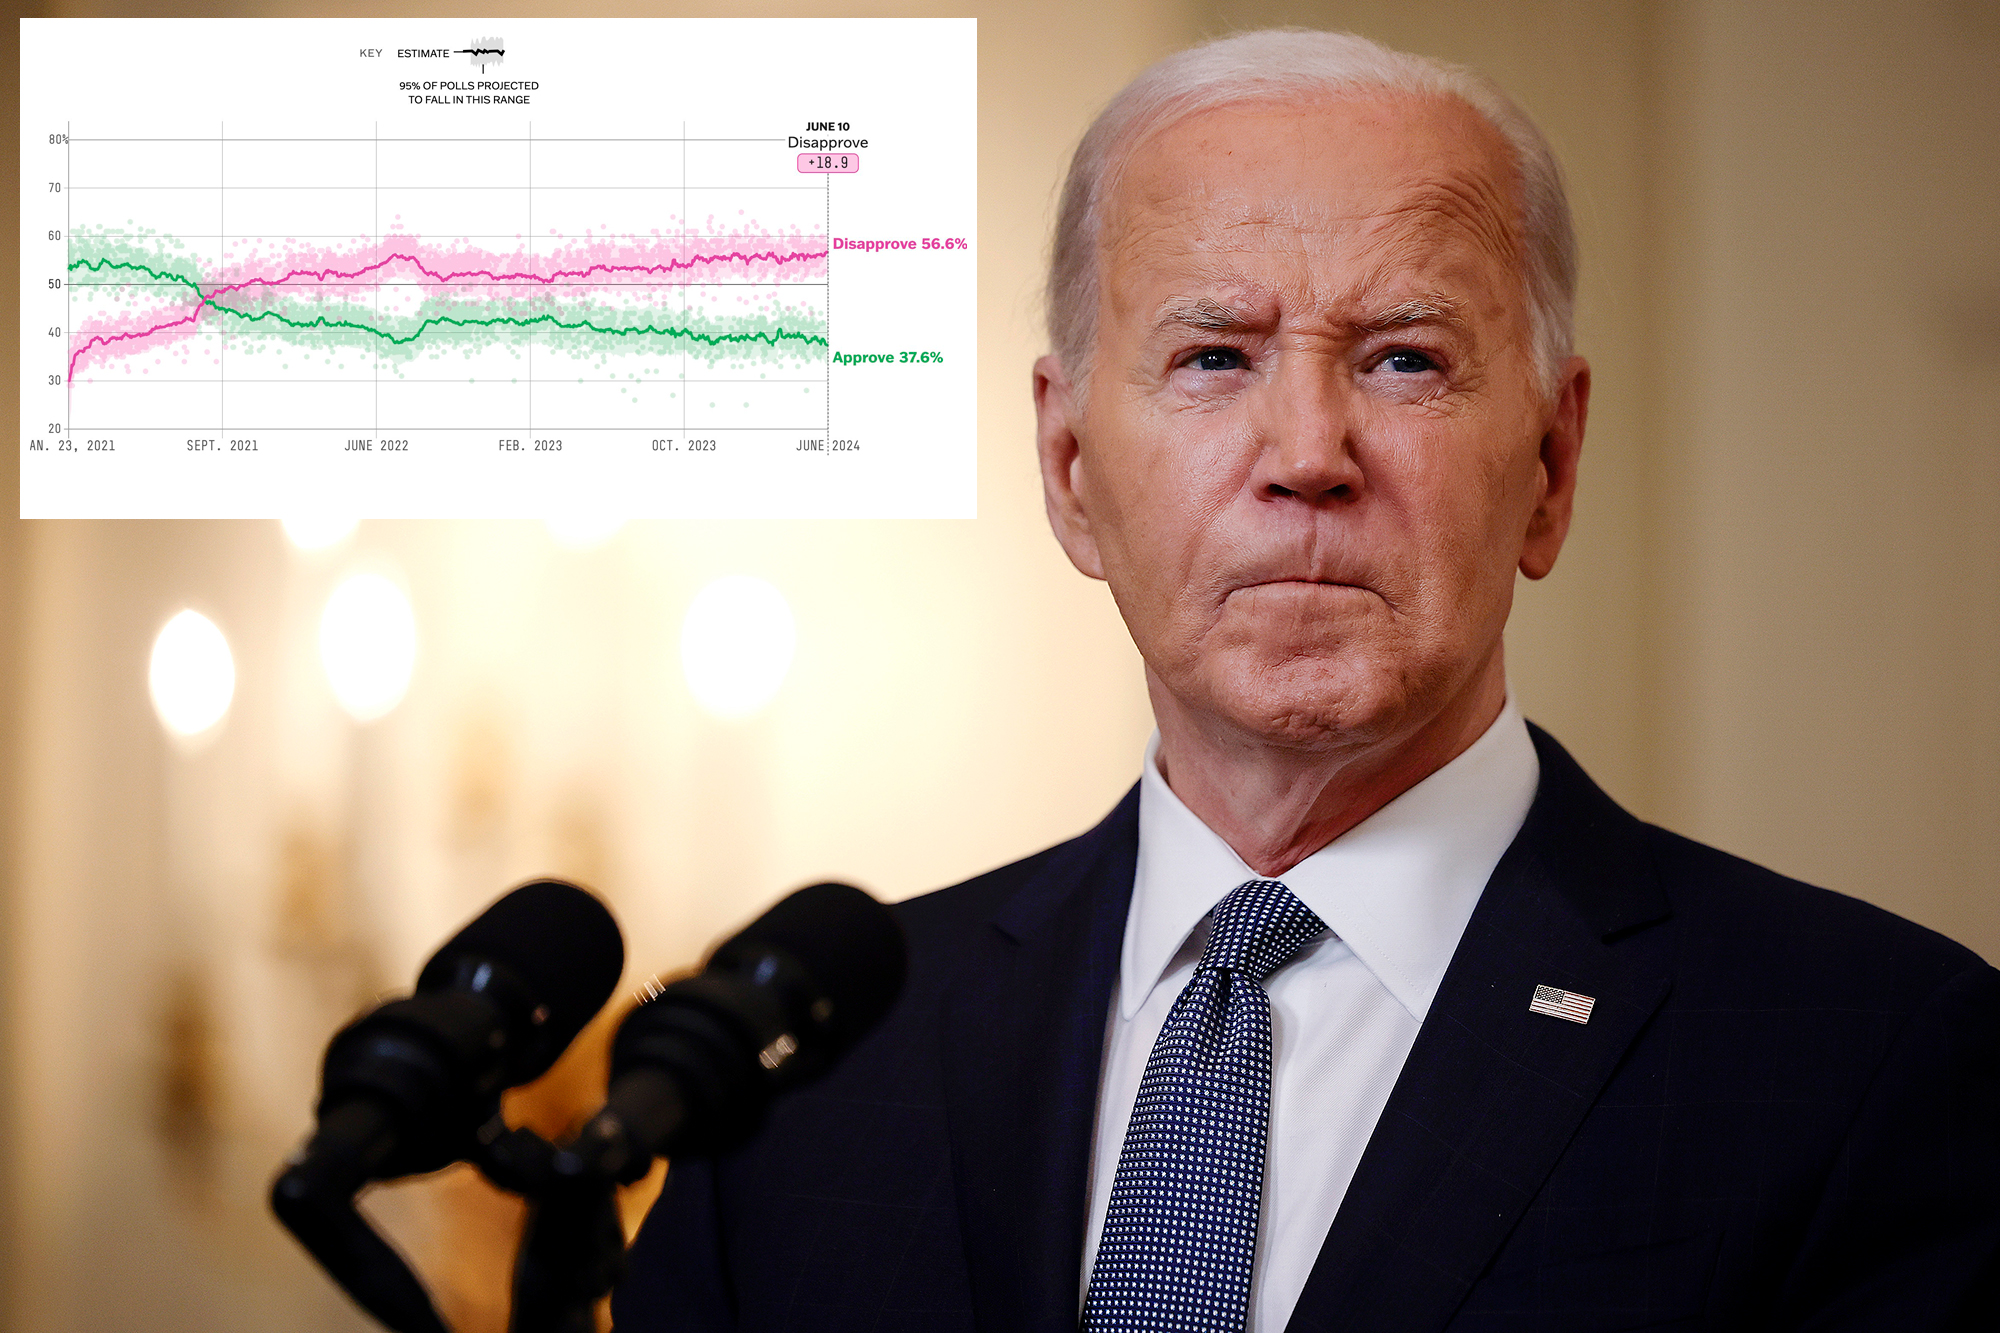 Top pollster suggests it may be time for Biden to drop out of 2024 presidential race as approval rating hits ‘all-time low’